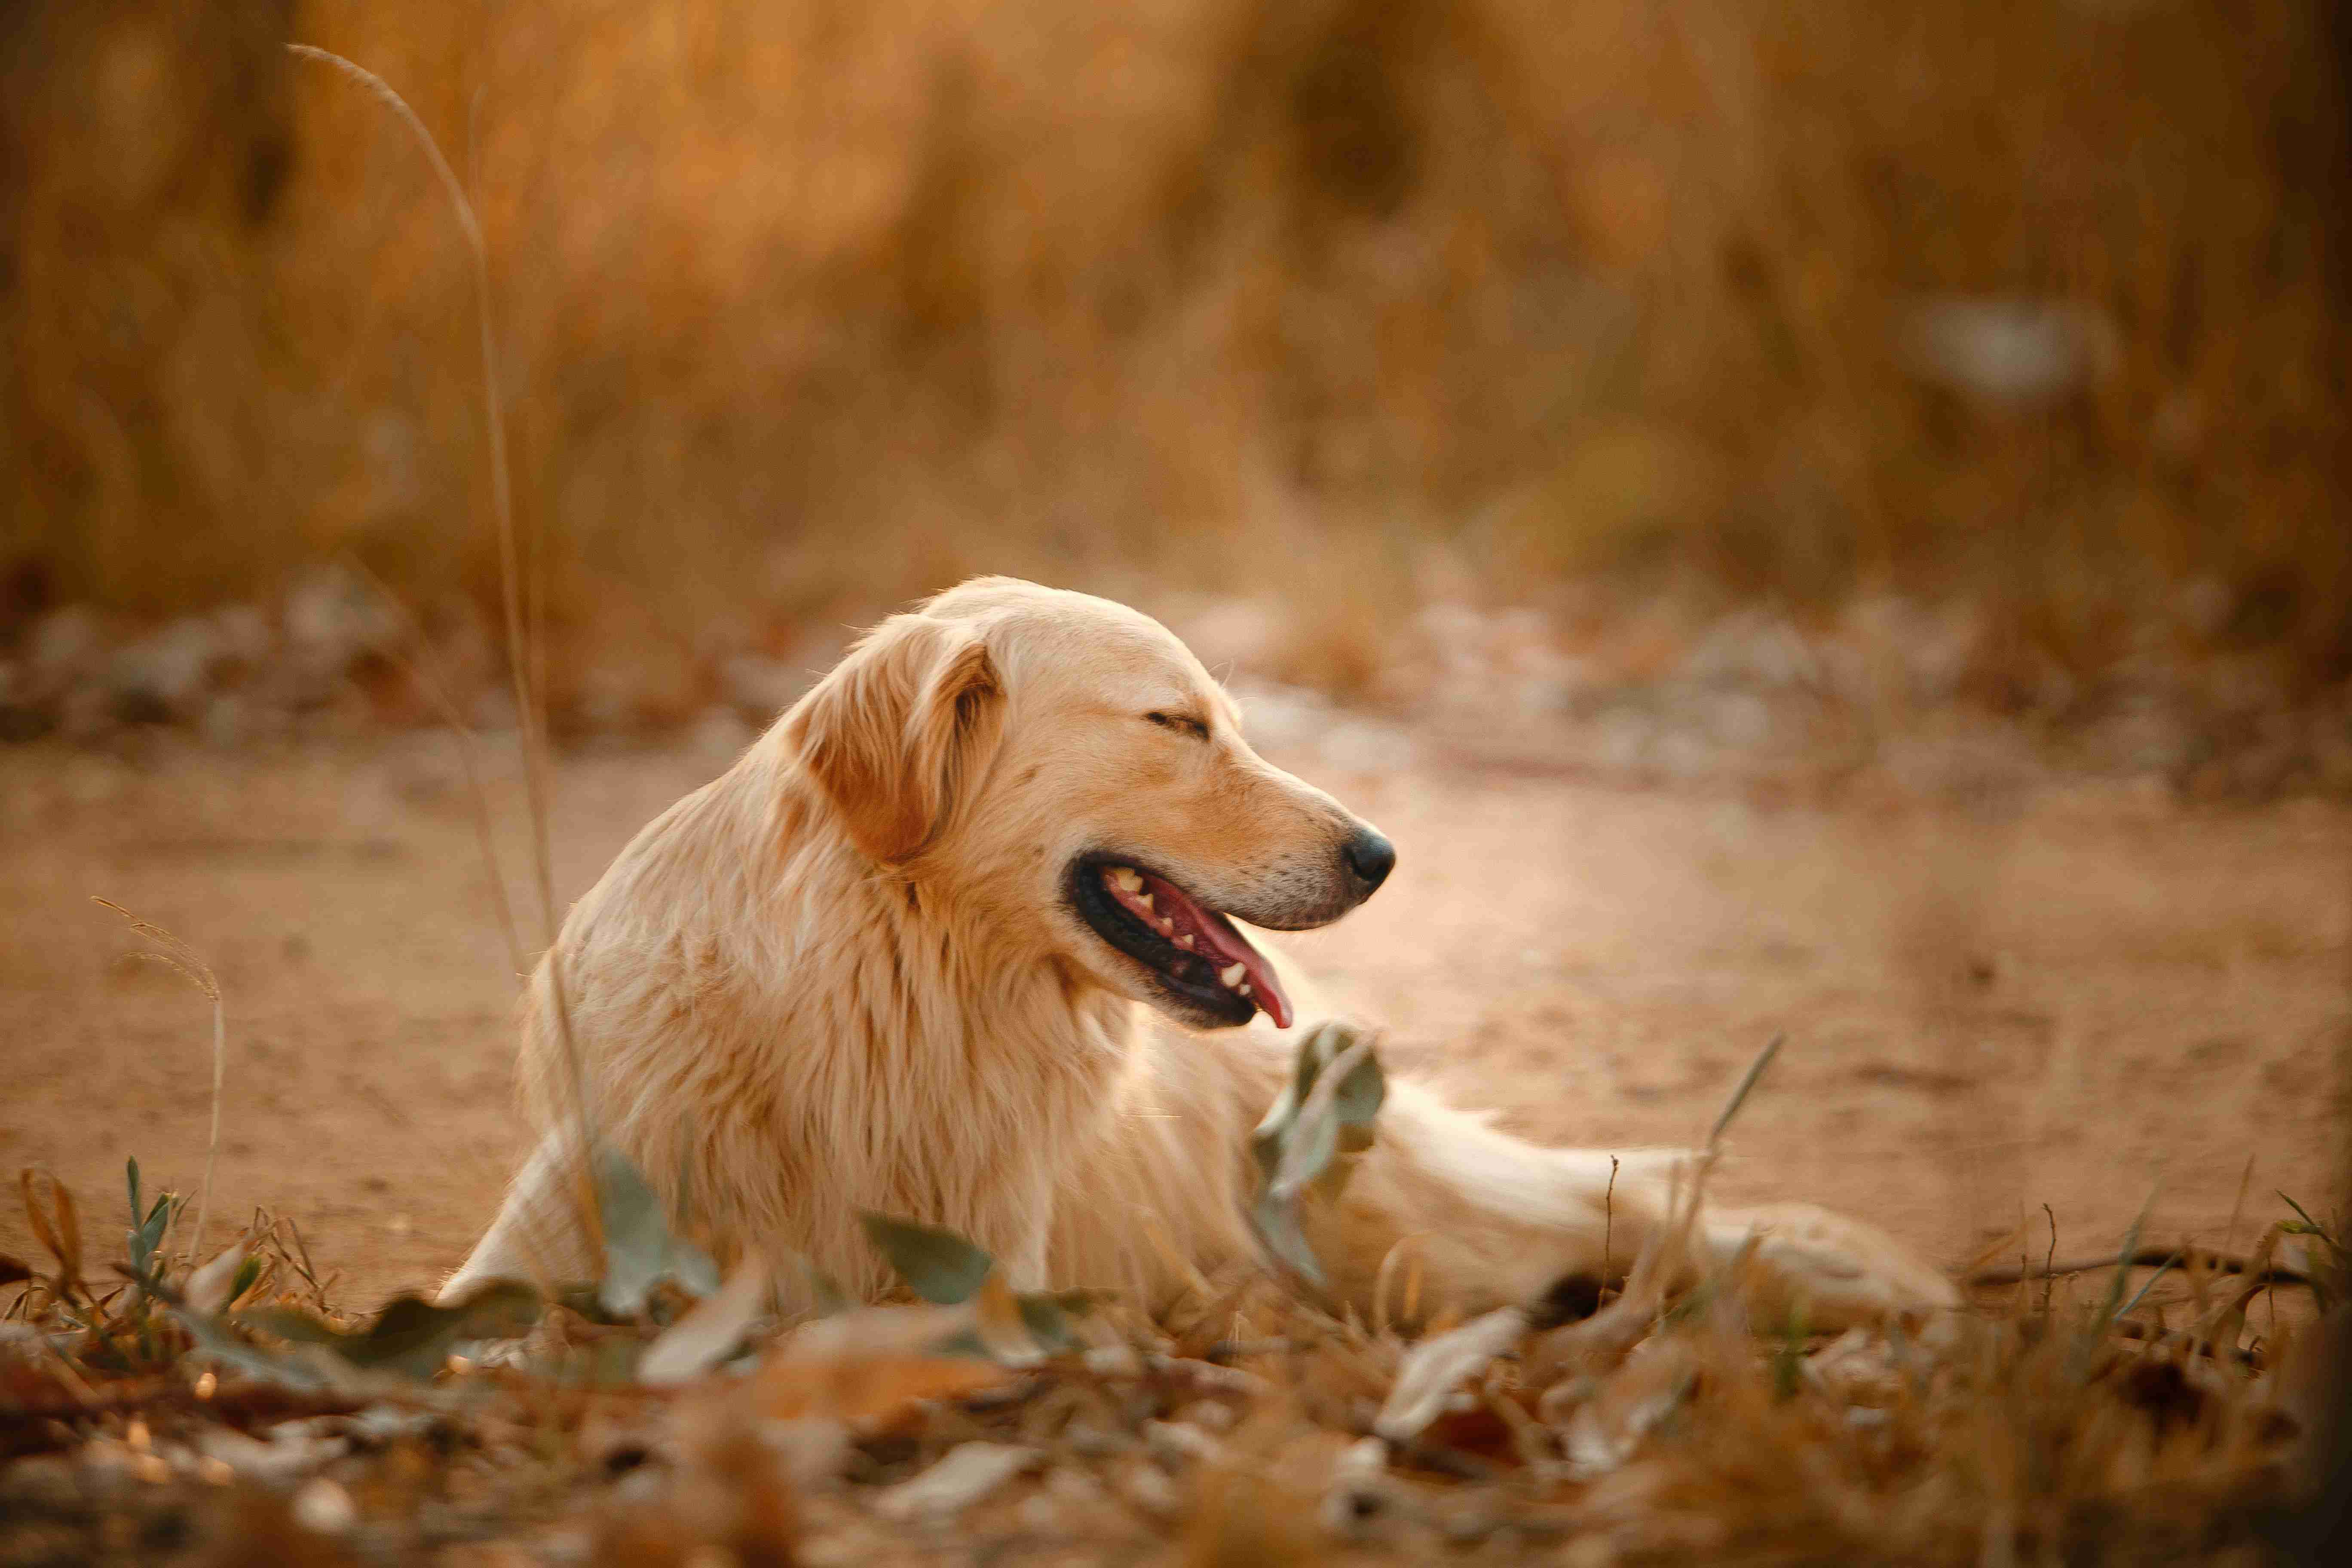 Do Golden Retrievers require any special vaccinations or preventive medications?